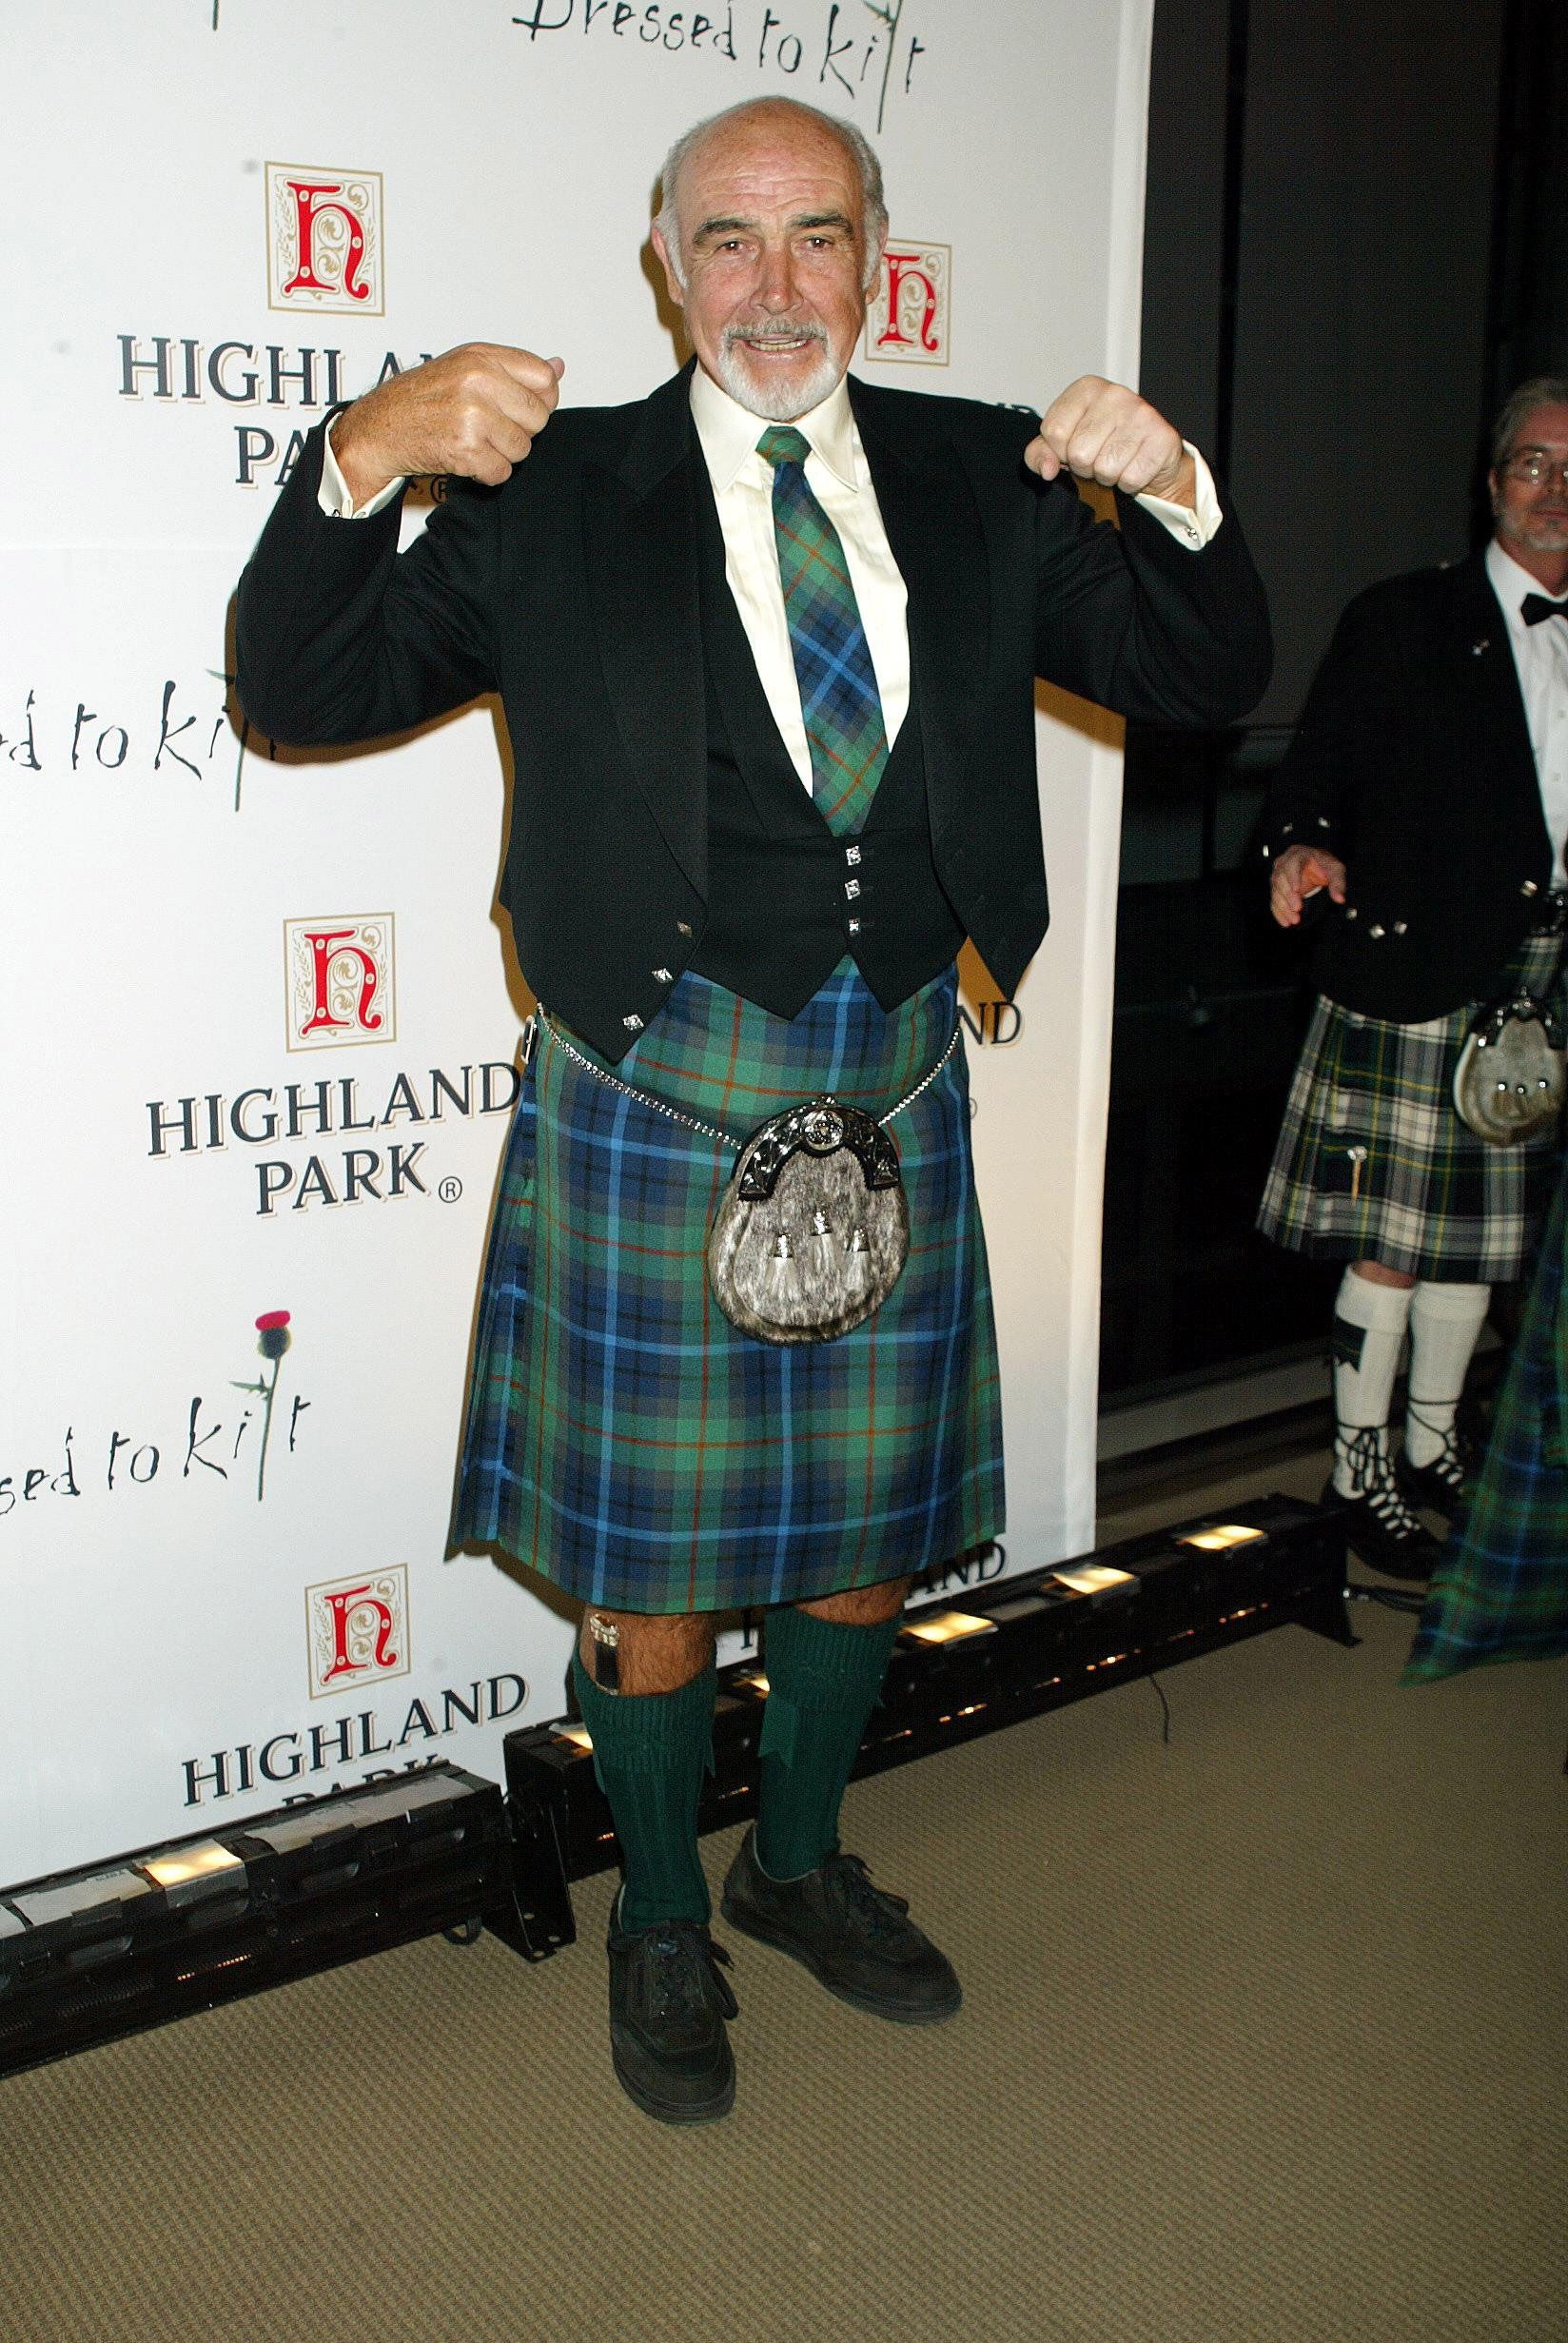 Should you wear underwear with a kilt? 9 questions about Scottish